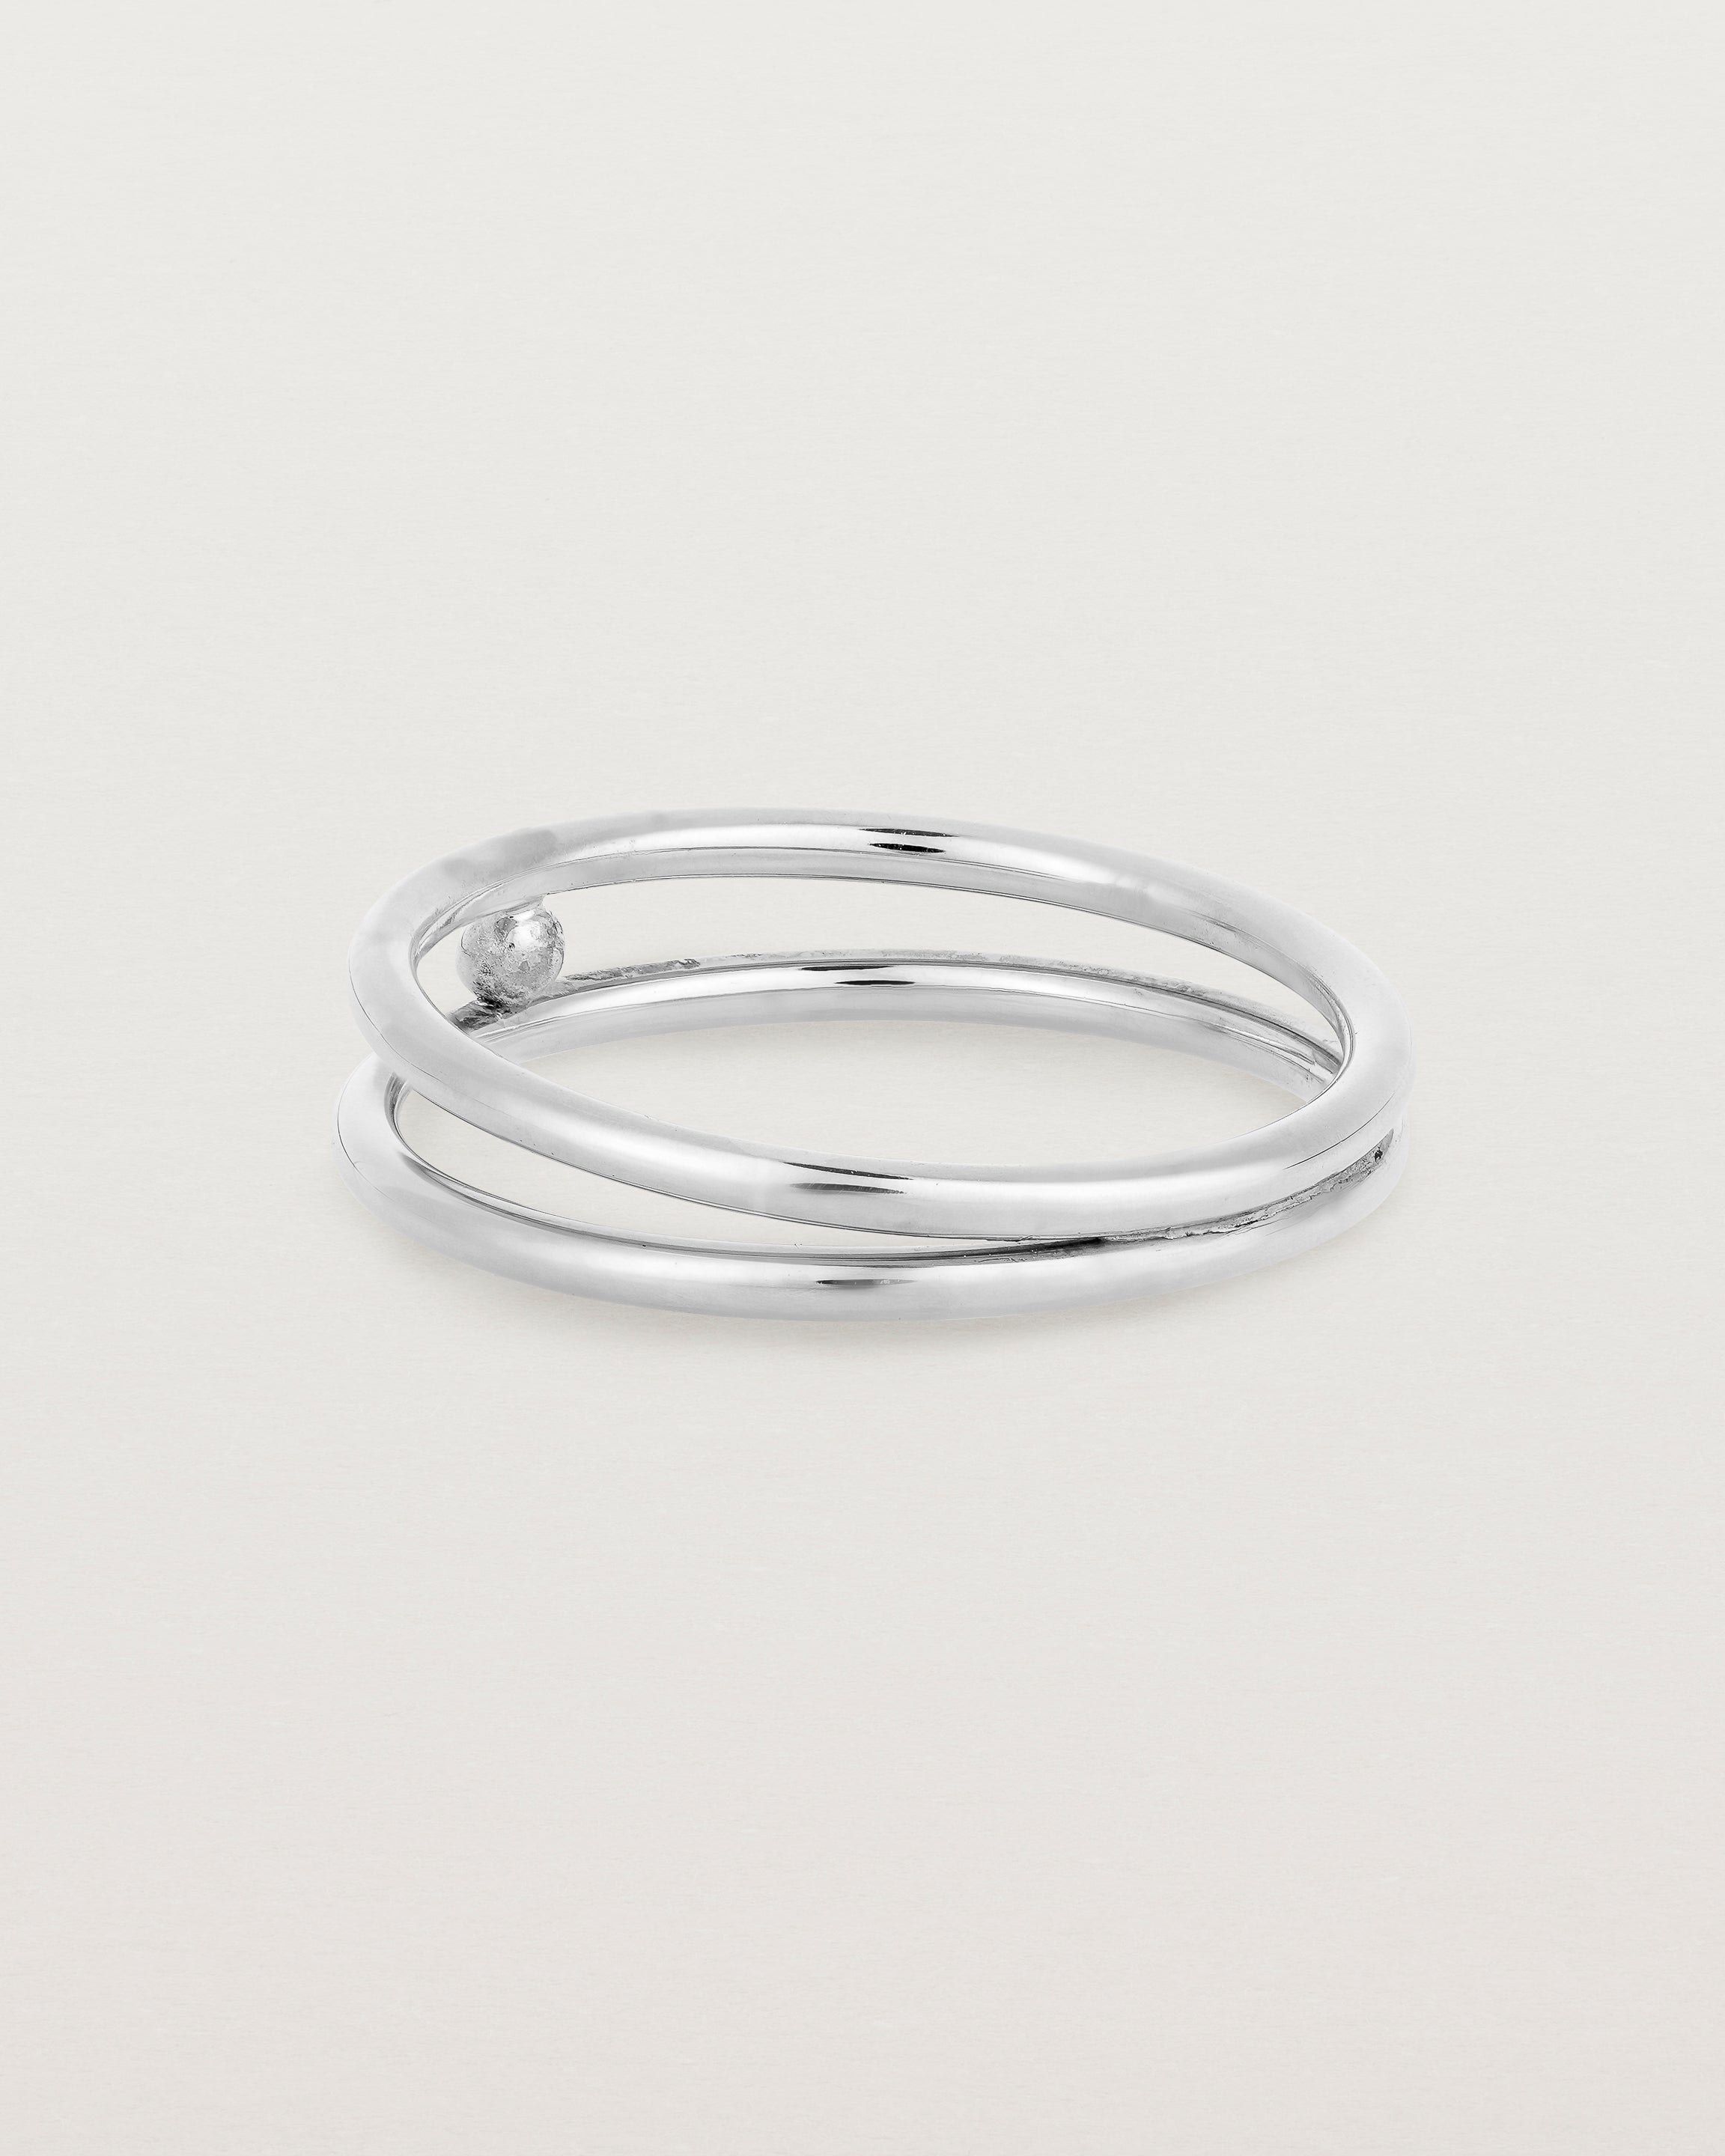 Back view of the Double Reliquum Ring in Sterling Silver.